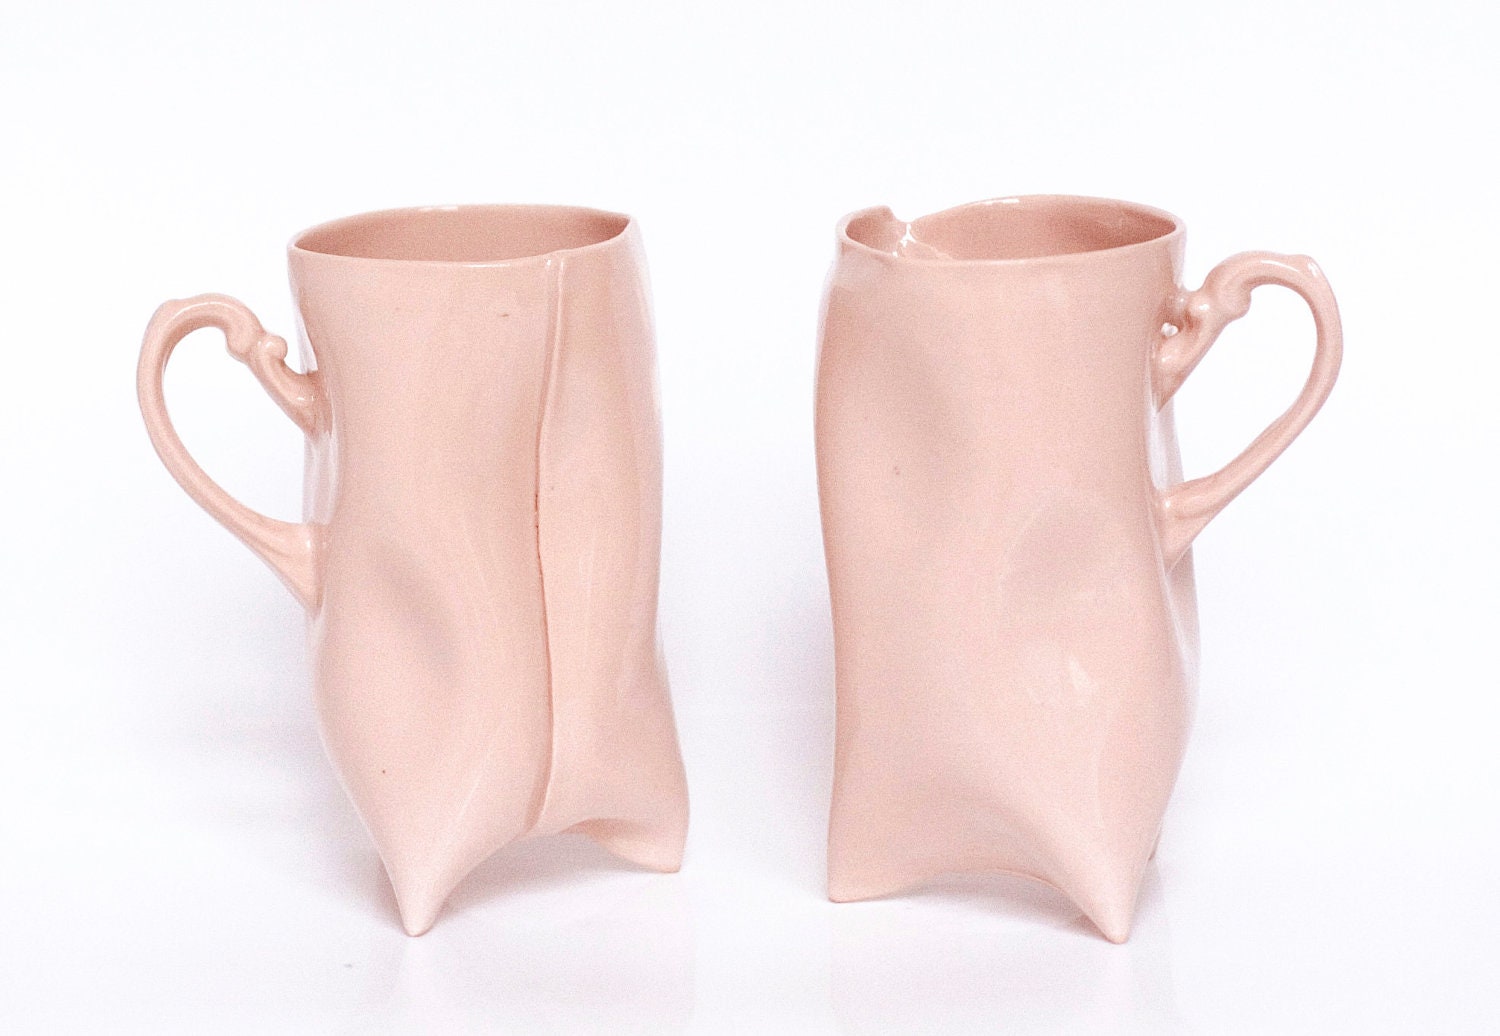 Porcelain cups set of pink , ceramic cups handbuilt for coffee or tea by Endesign - ENDEsign